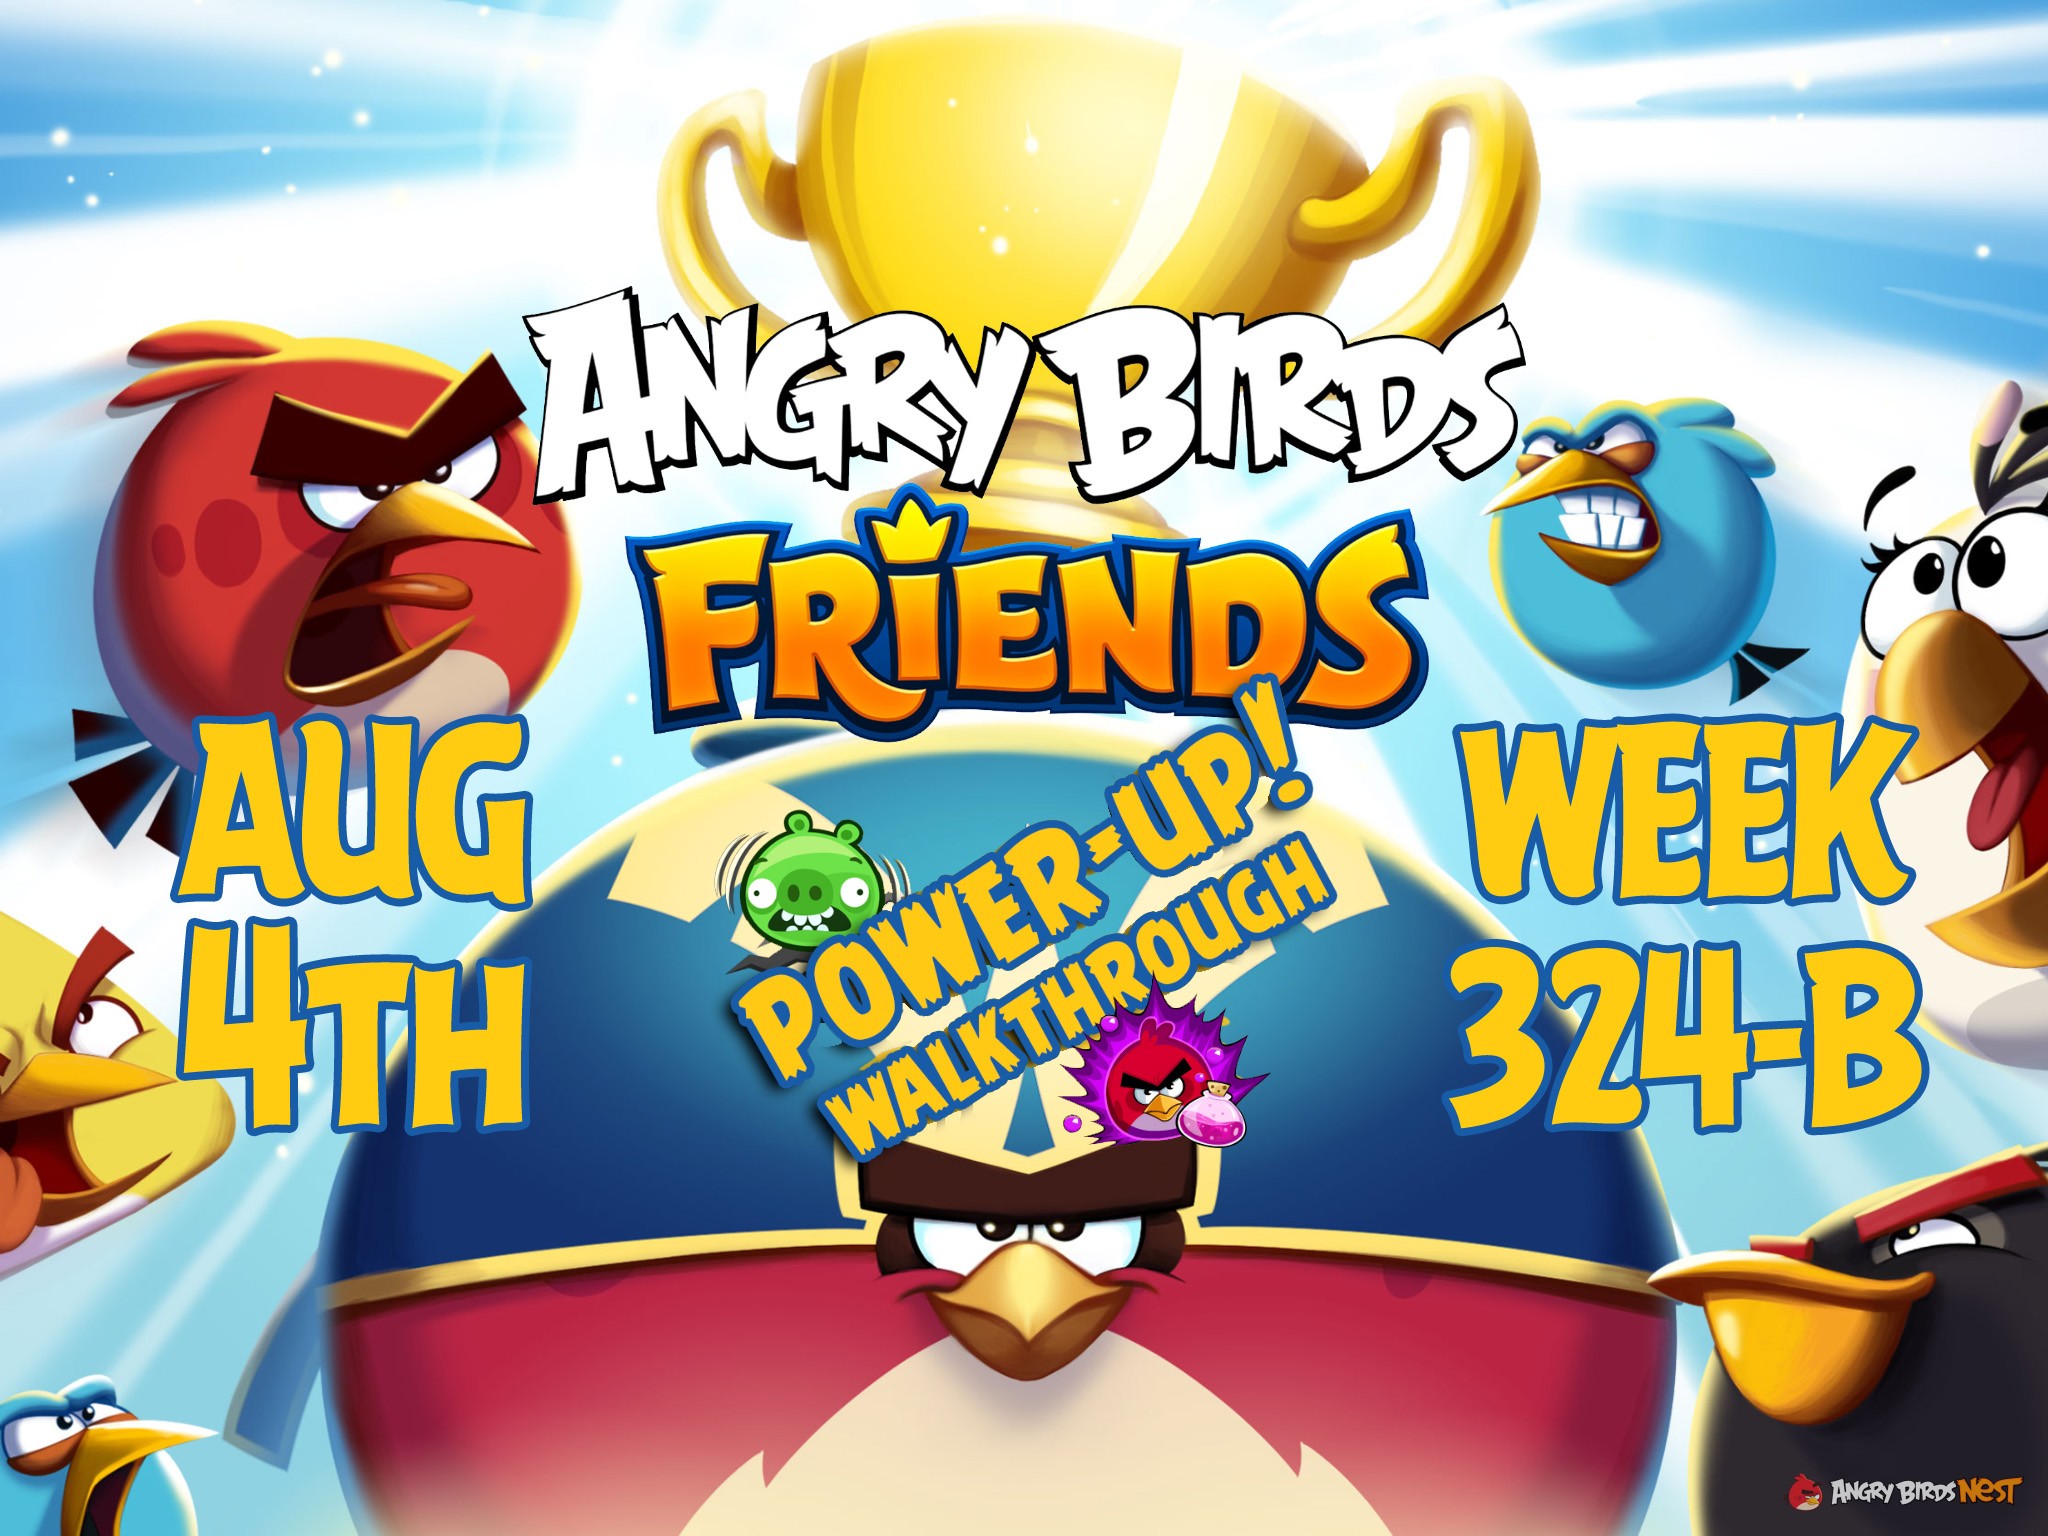 Angry-Birds-Friends-Tournament-Week-324-B-Feature-Image-PU